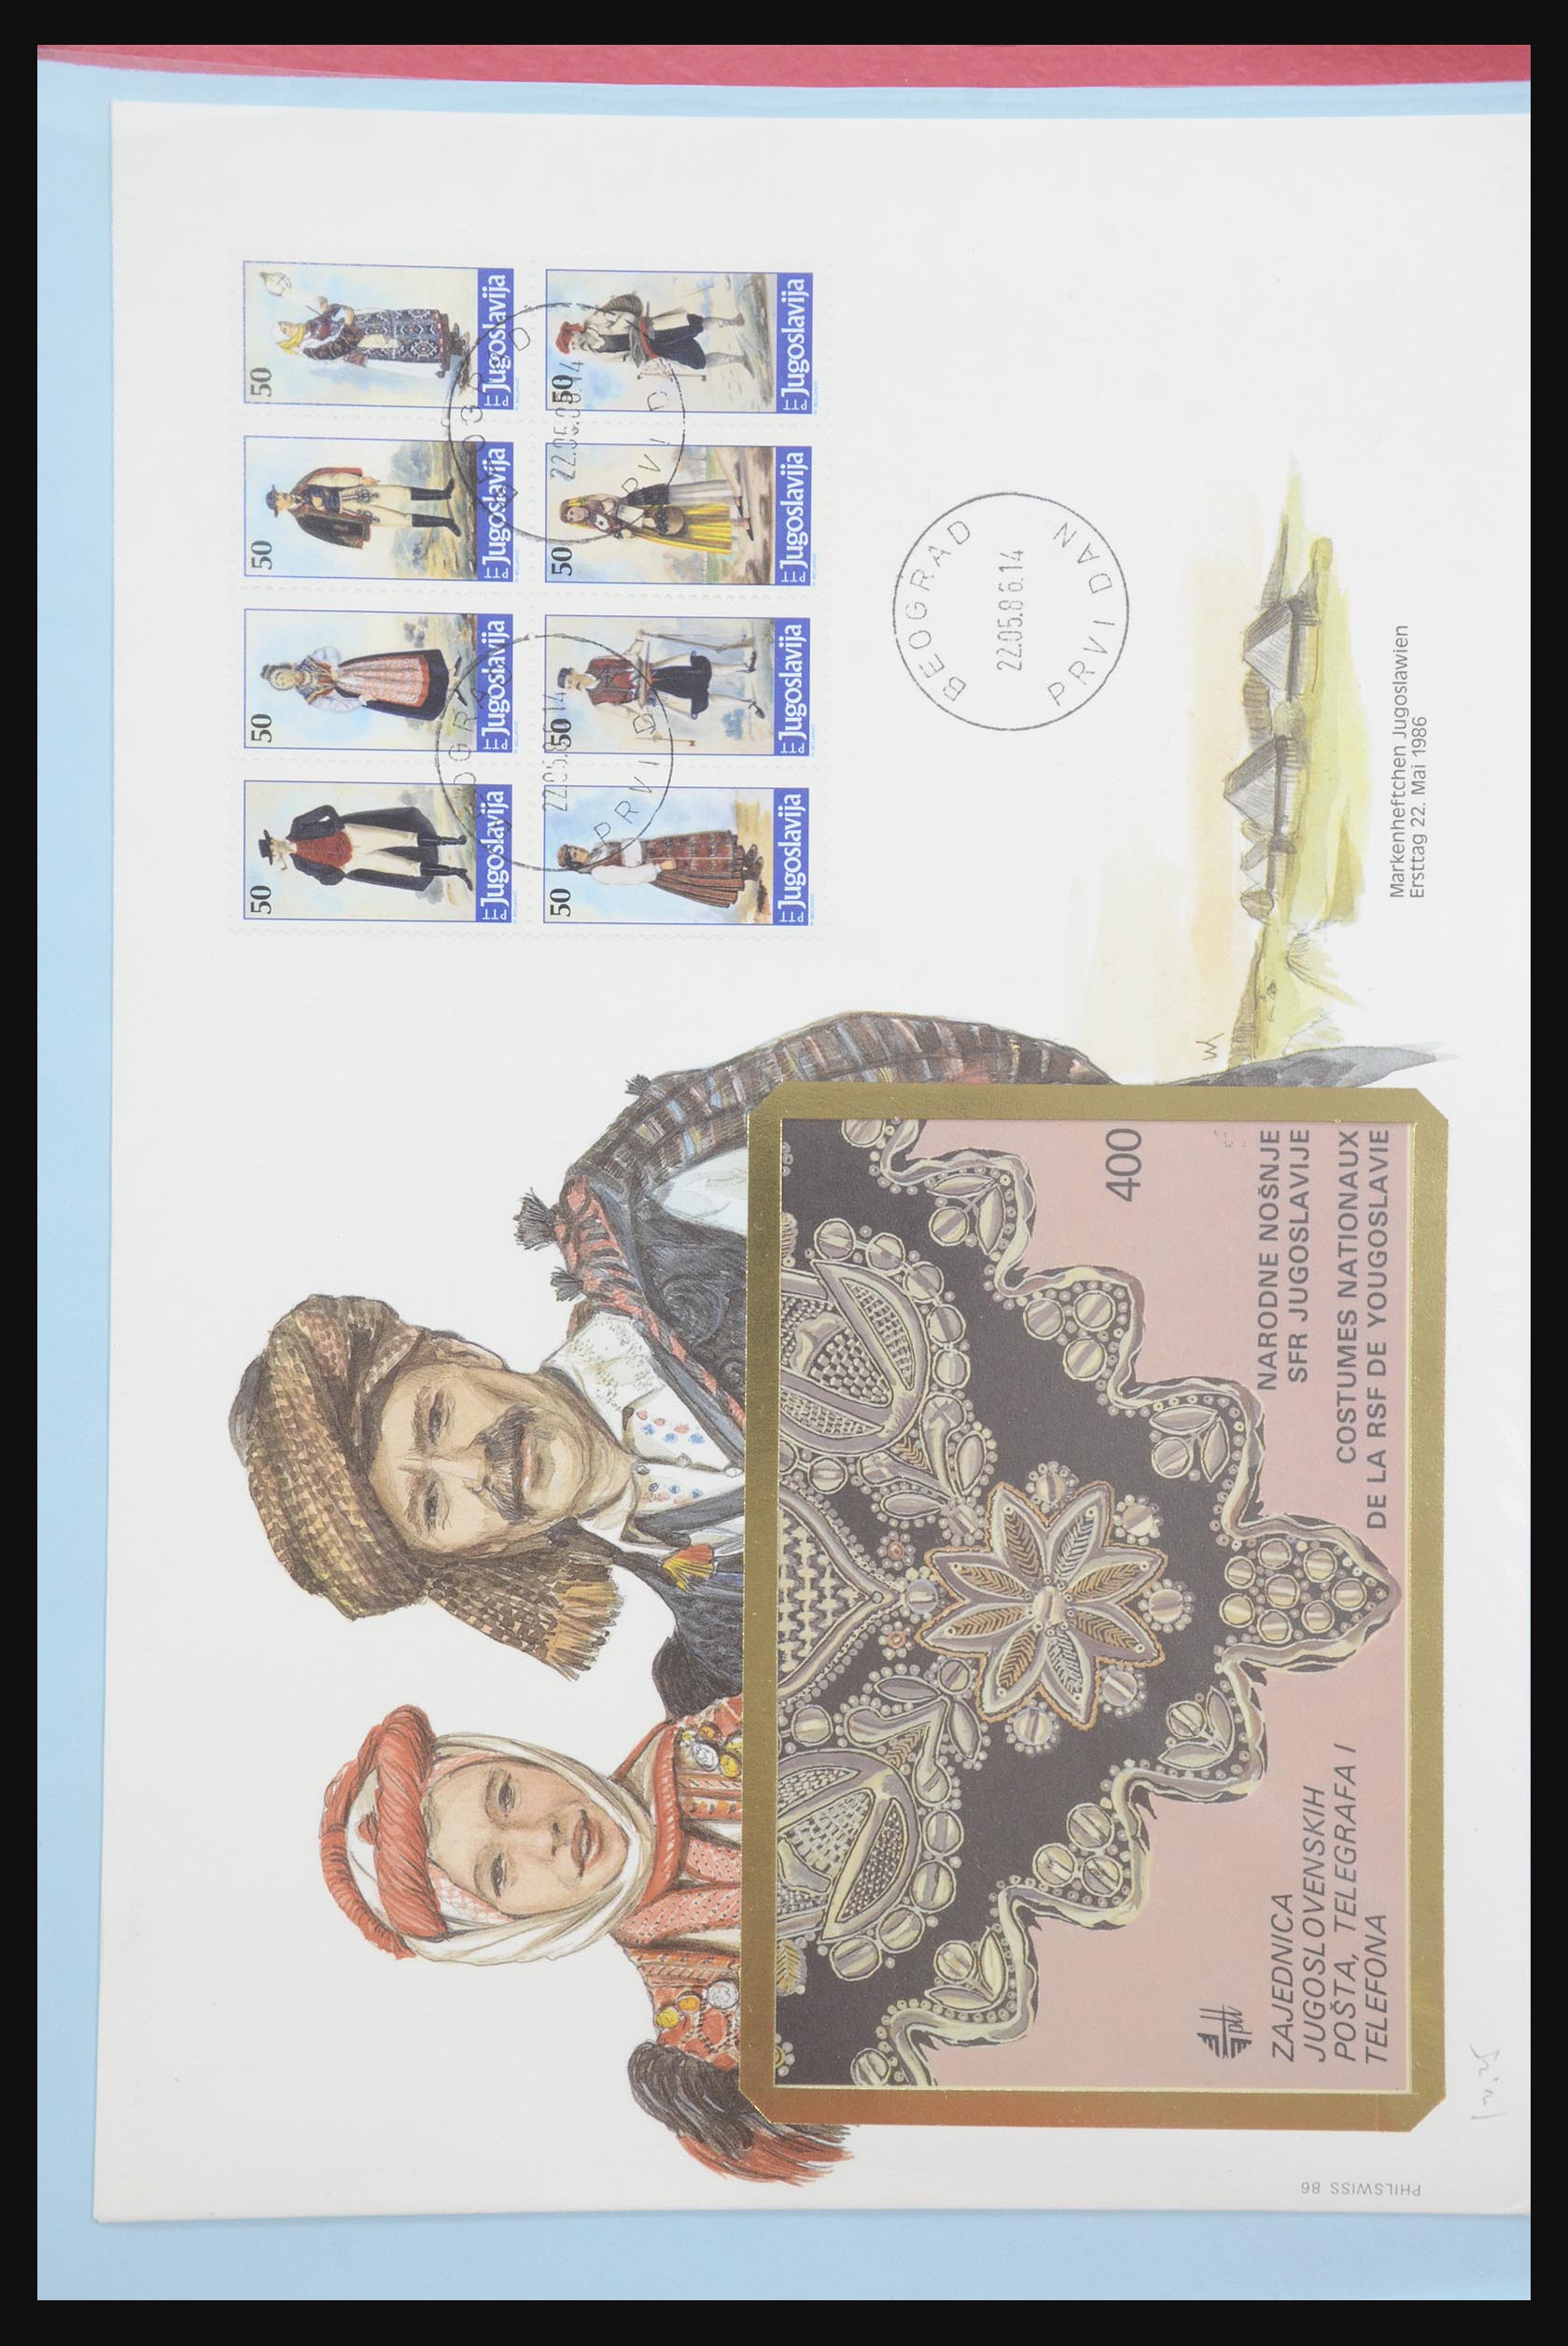 31915 122 - 31915 Western Europe souvenir sheets and stamp booklets on FDC.